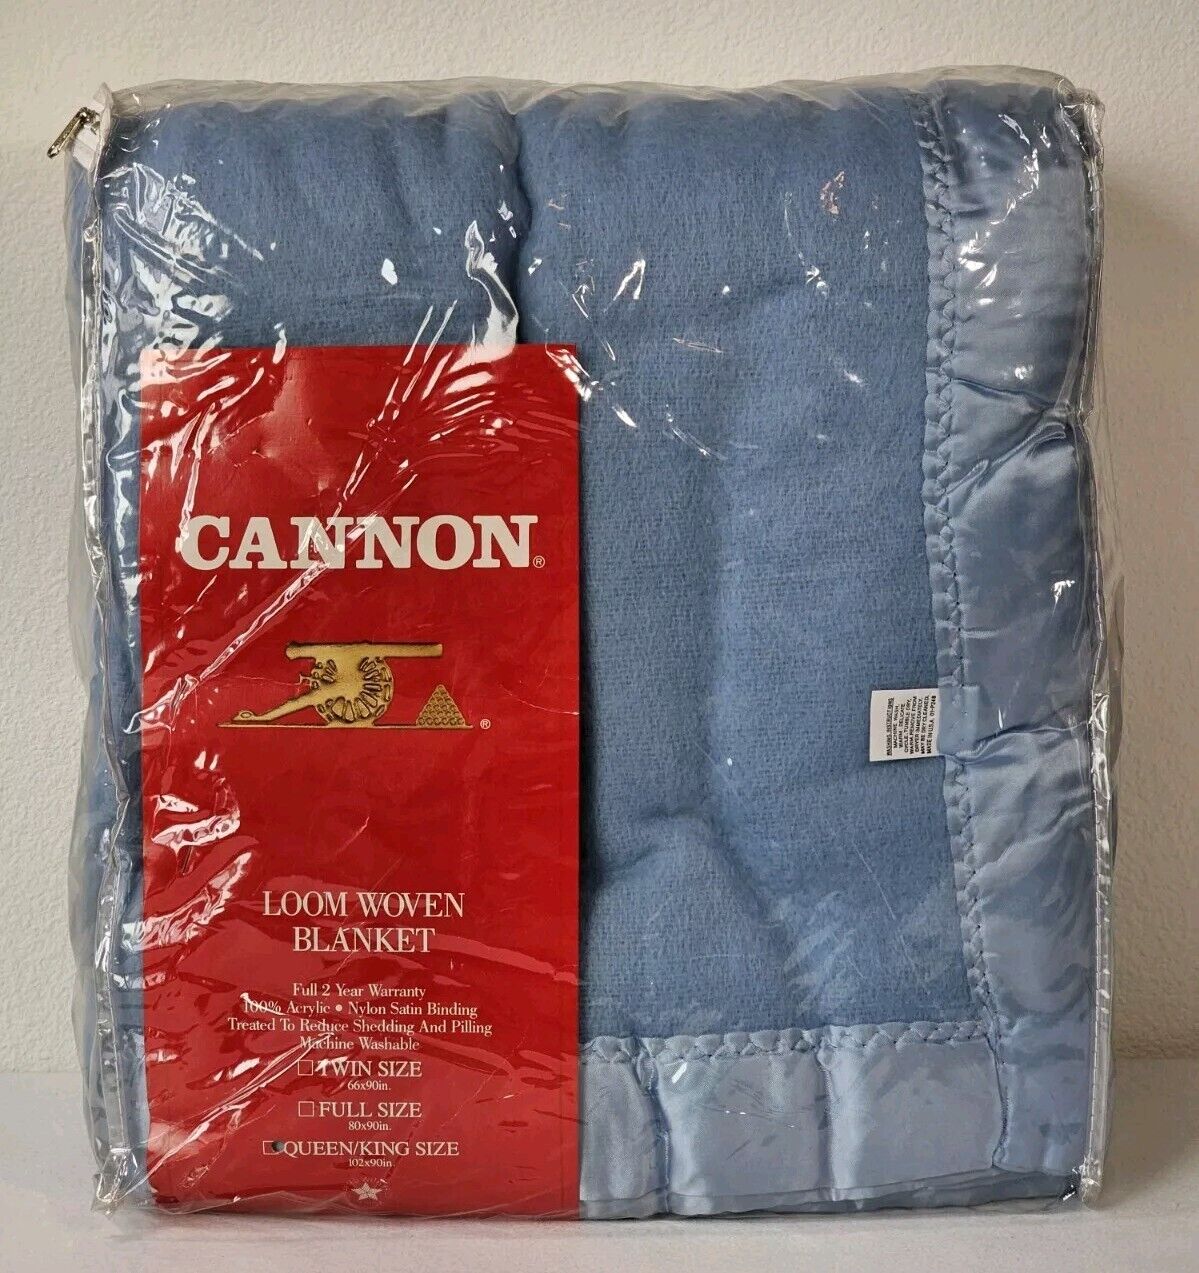 Vintage Cannon Loom Woven Blanket Size Queen / King 102